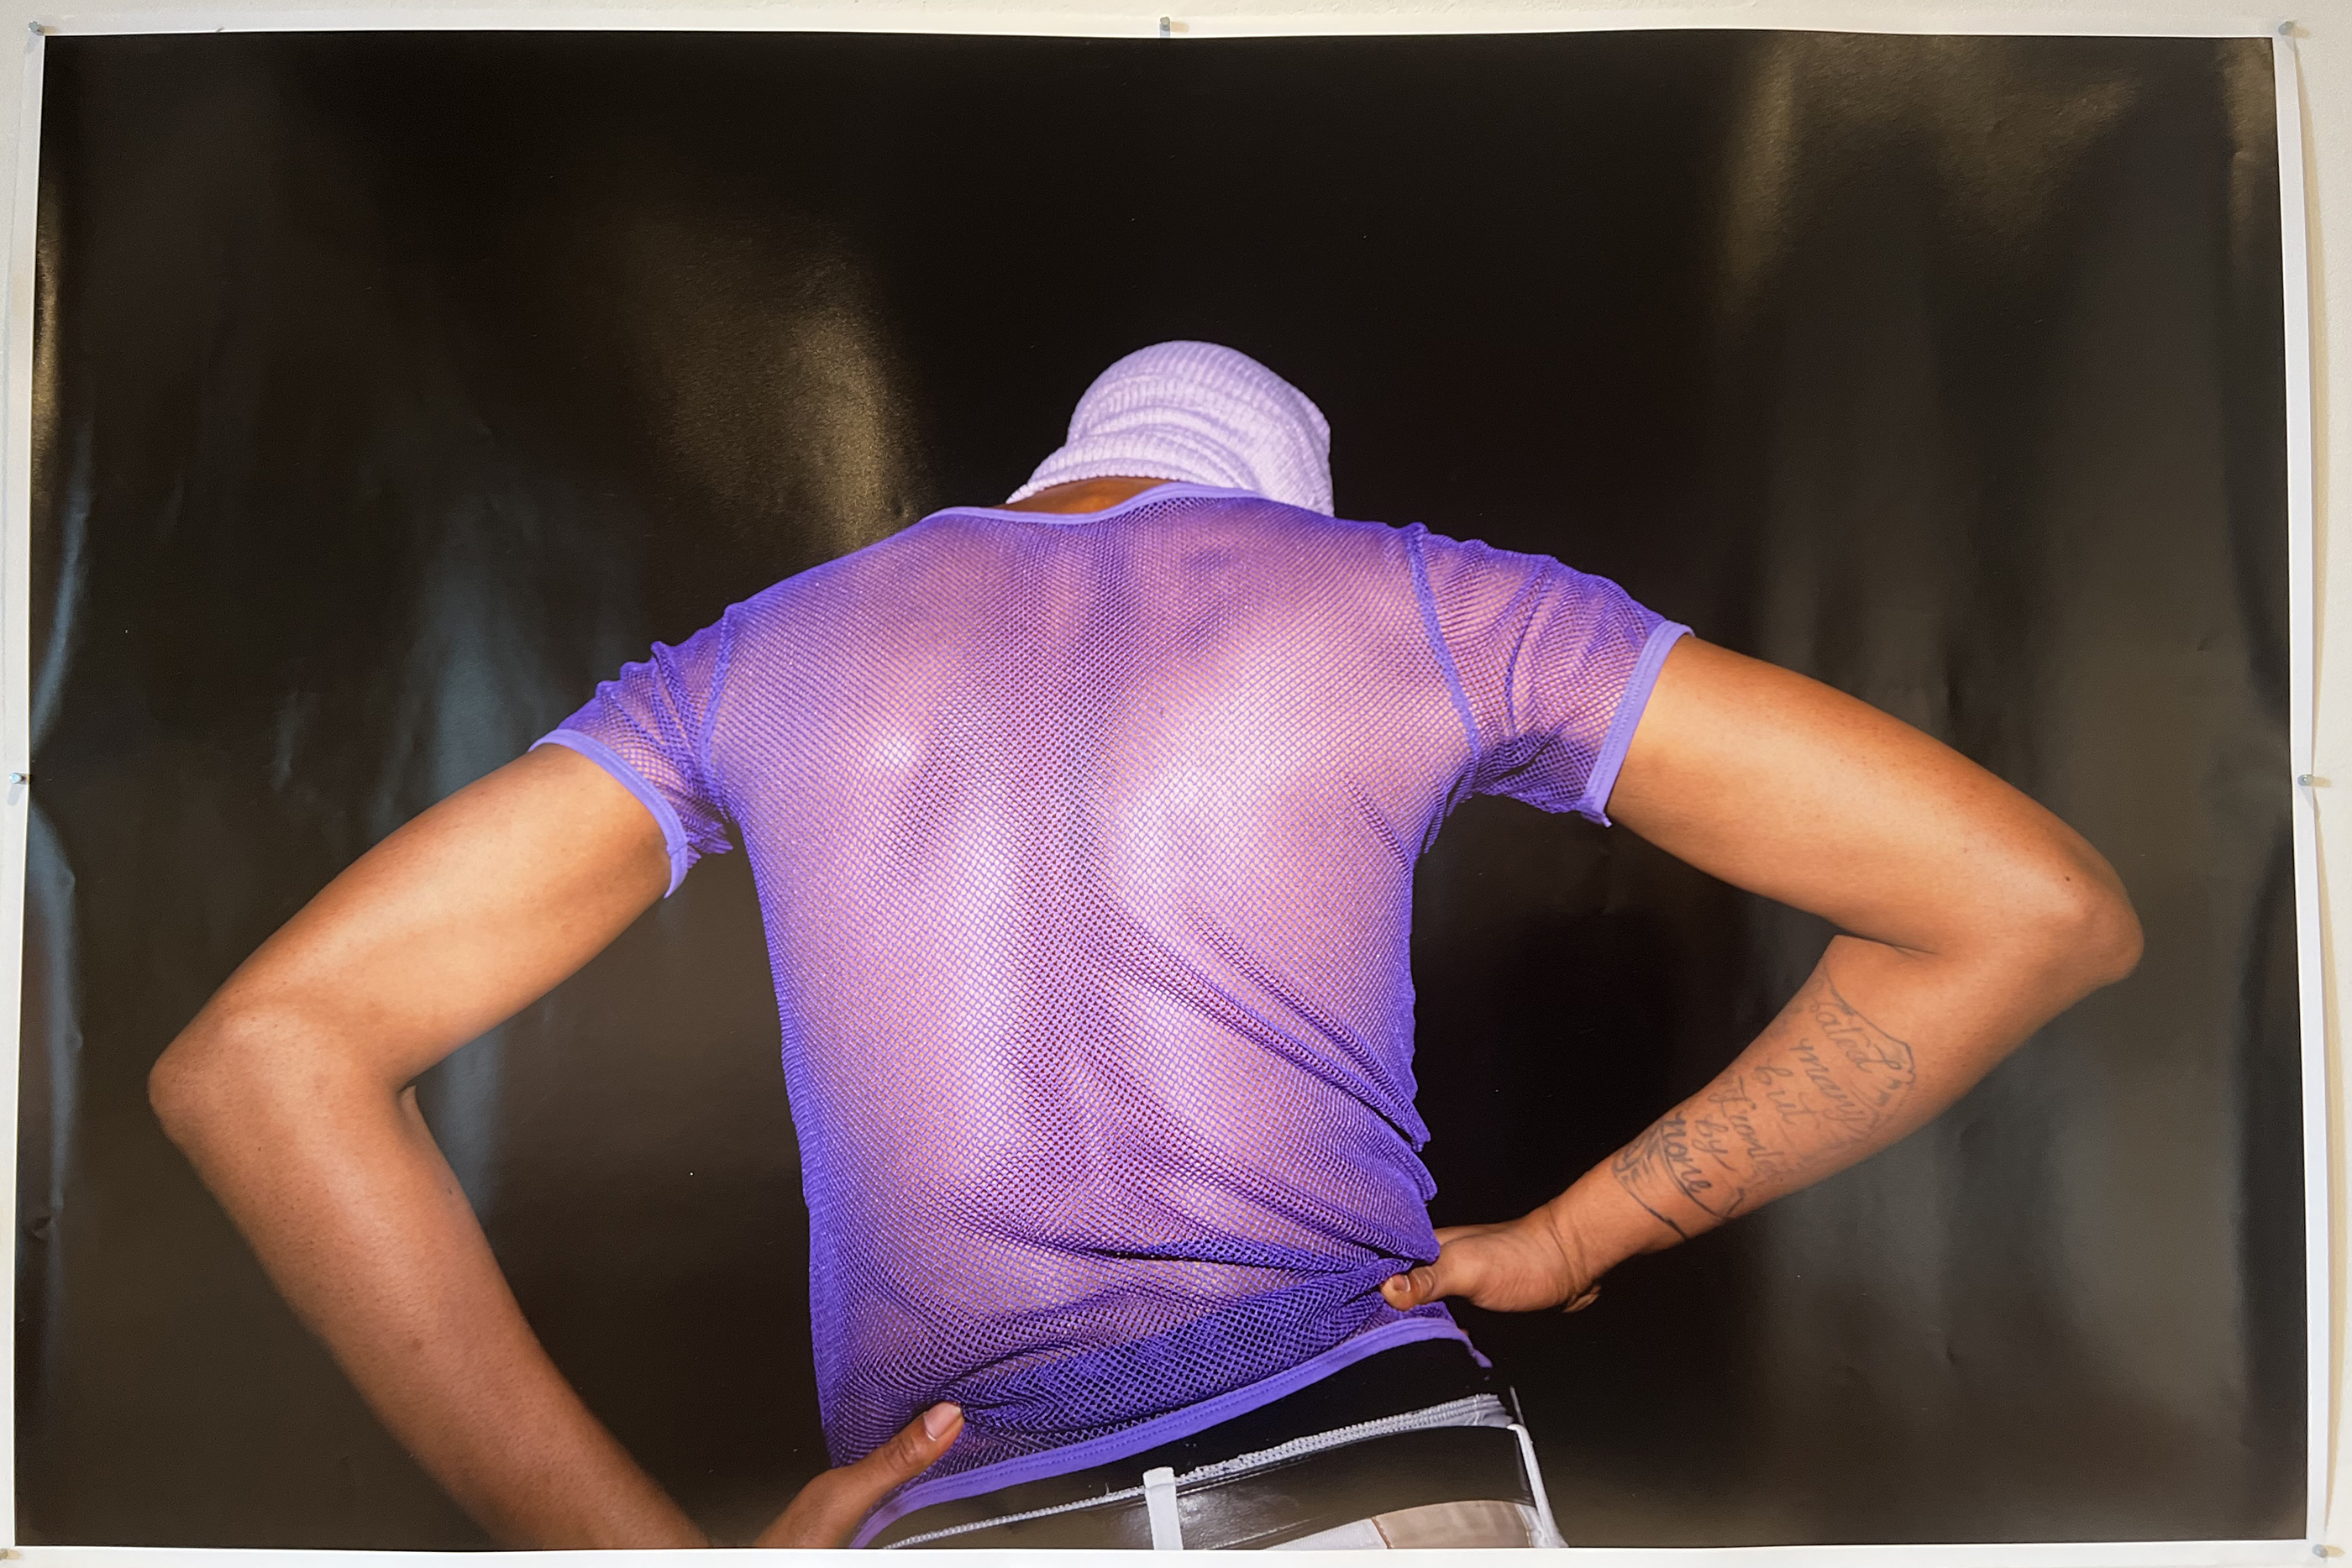 photograph of man in purple mesh top